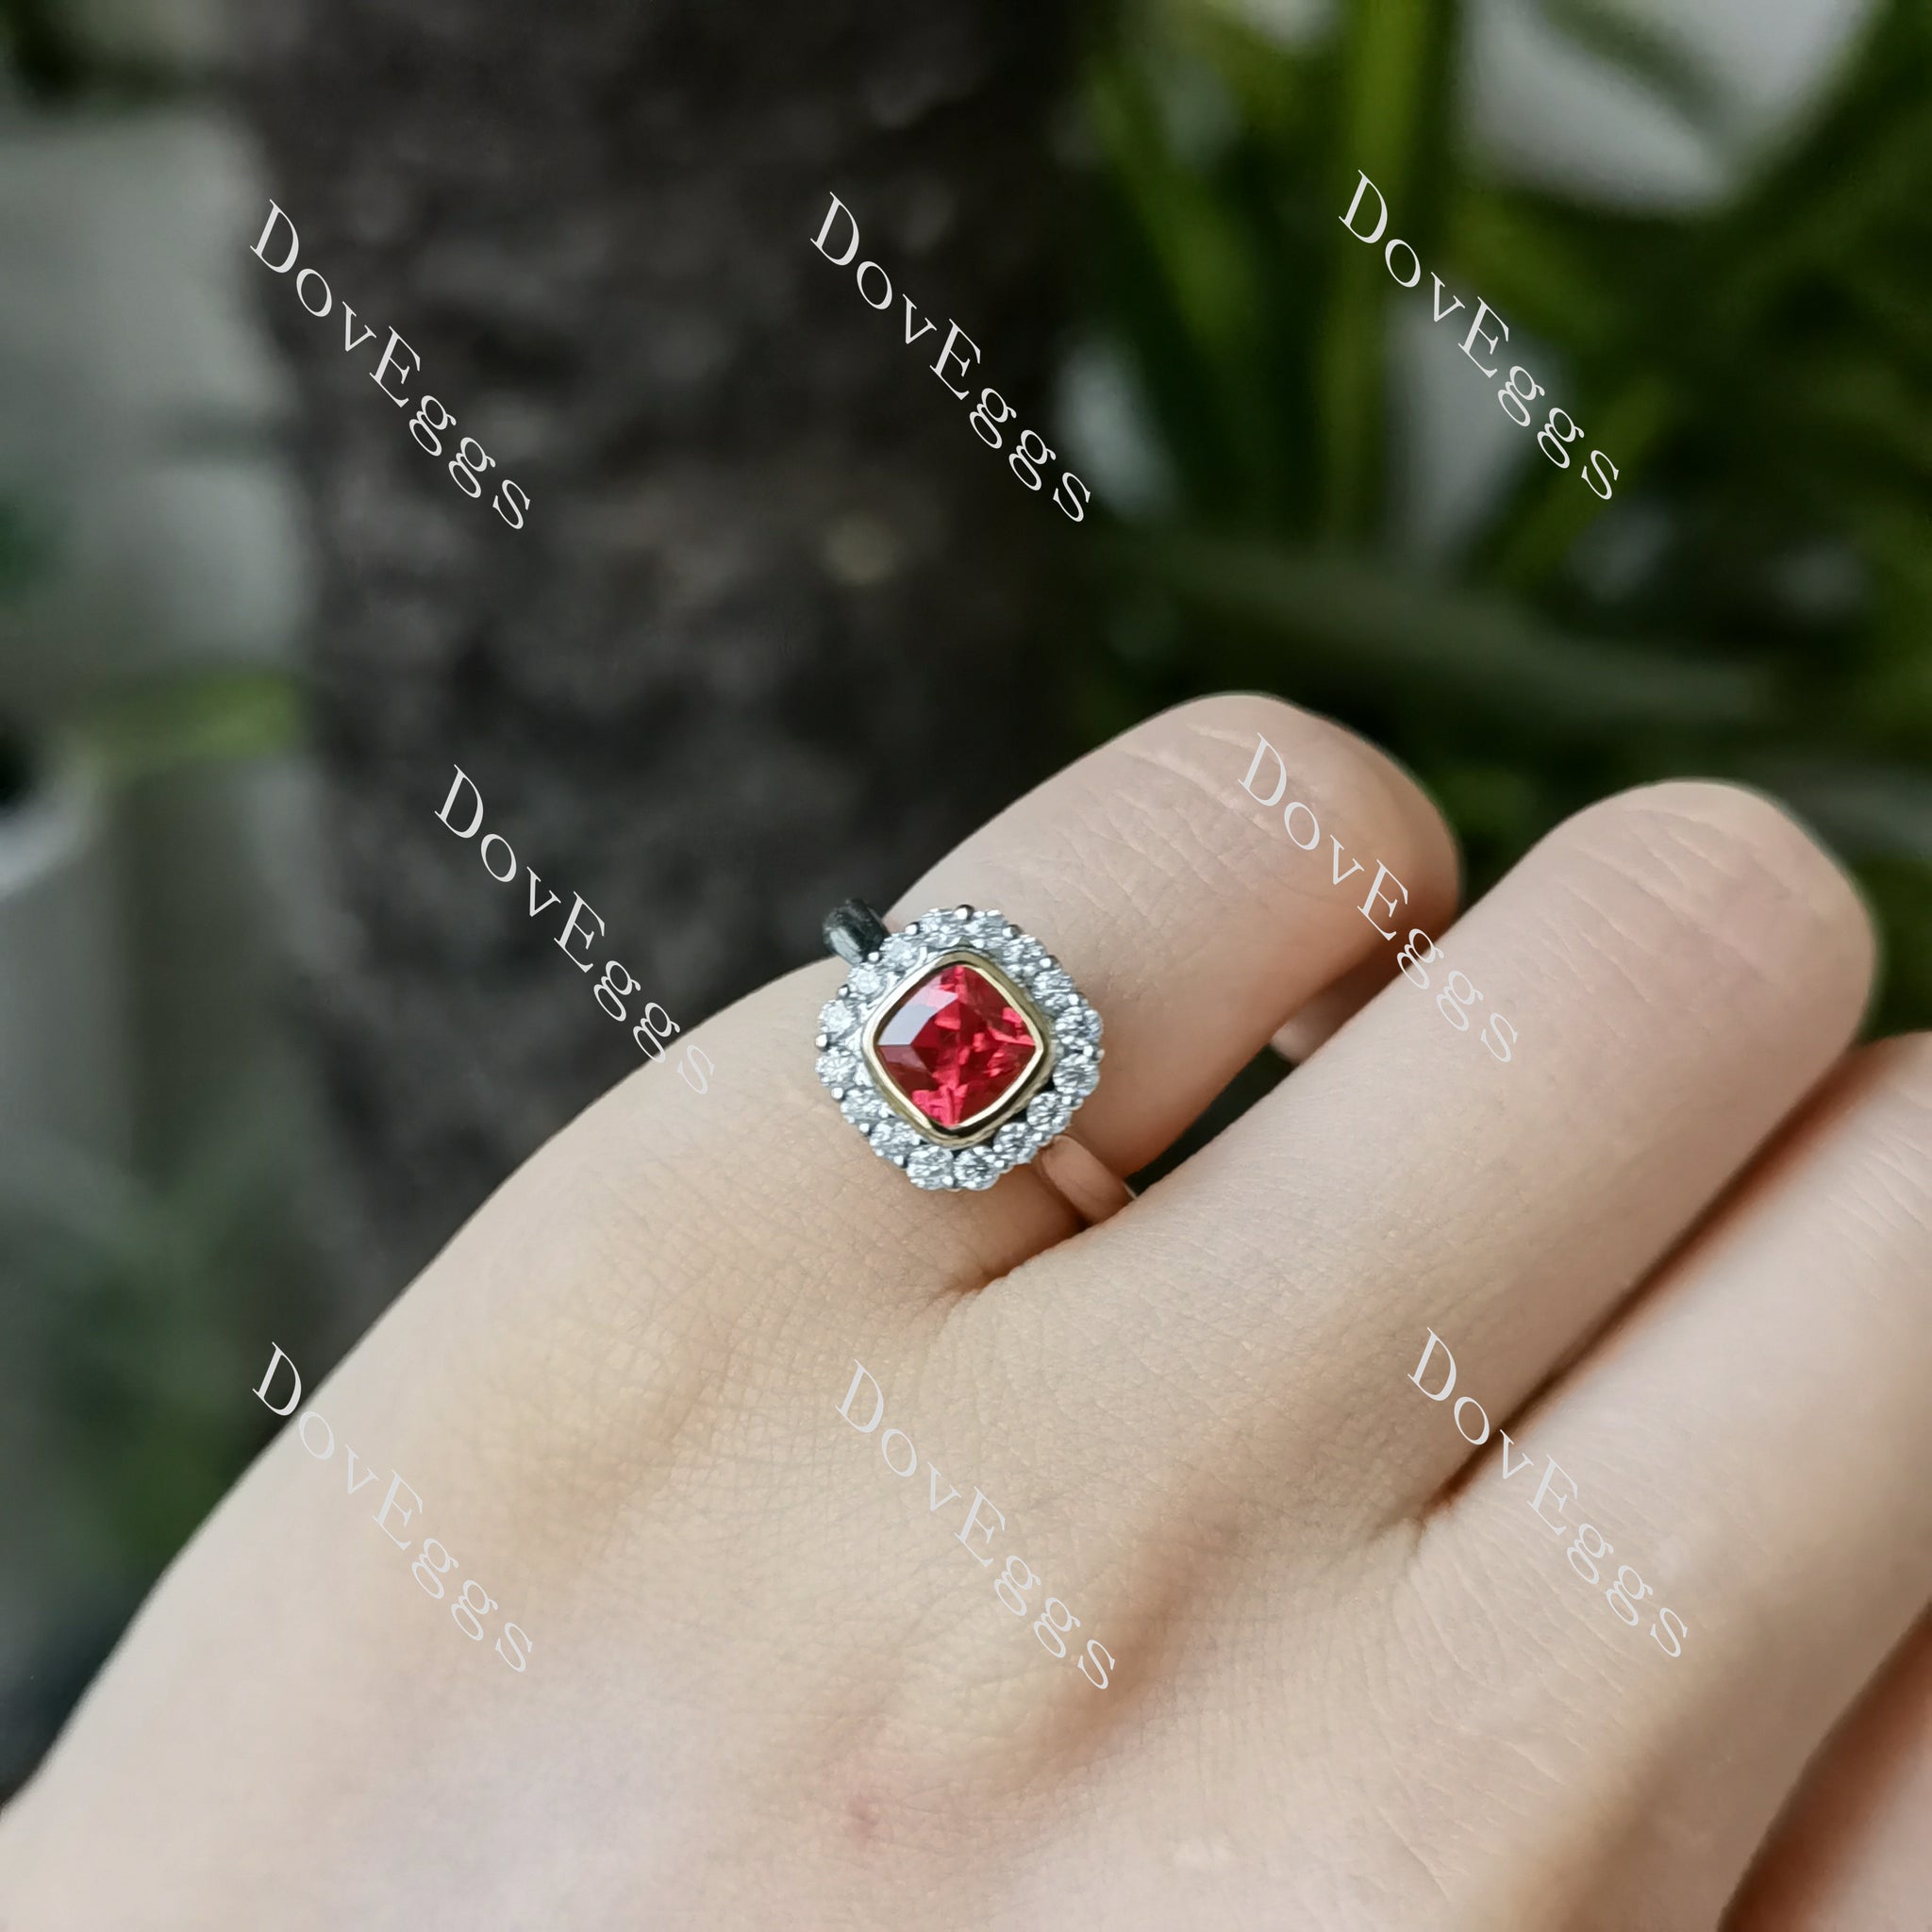 DovEggs cushion floral bezel halo ruby colored gem sterling silver engagement ring